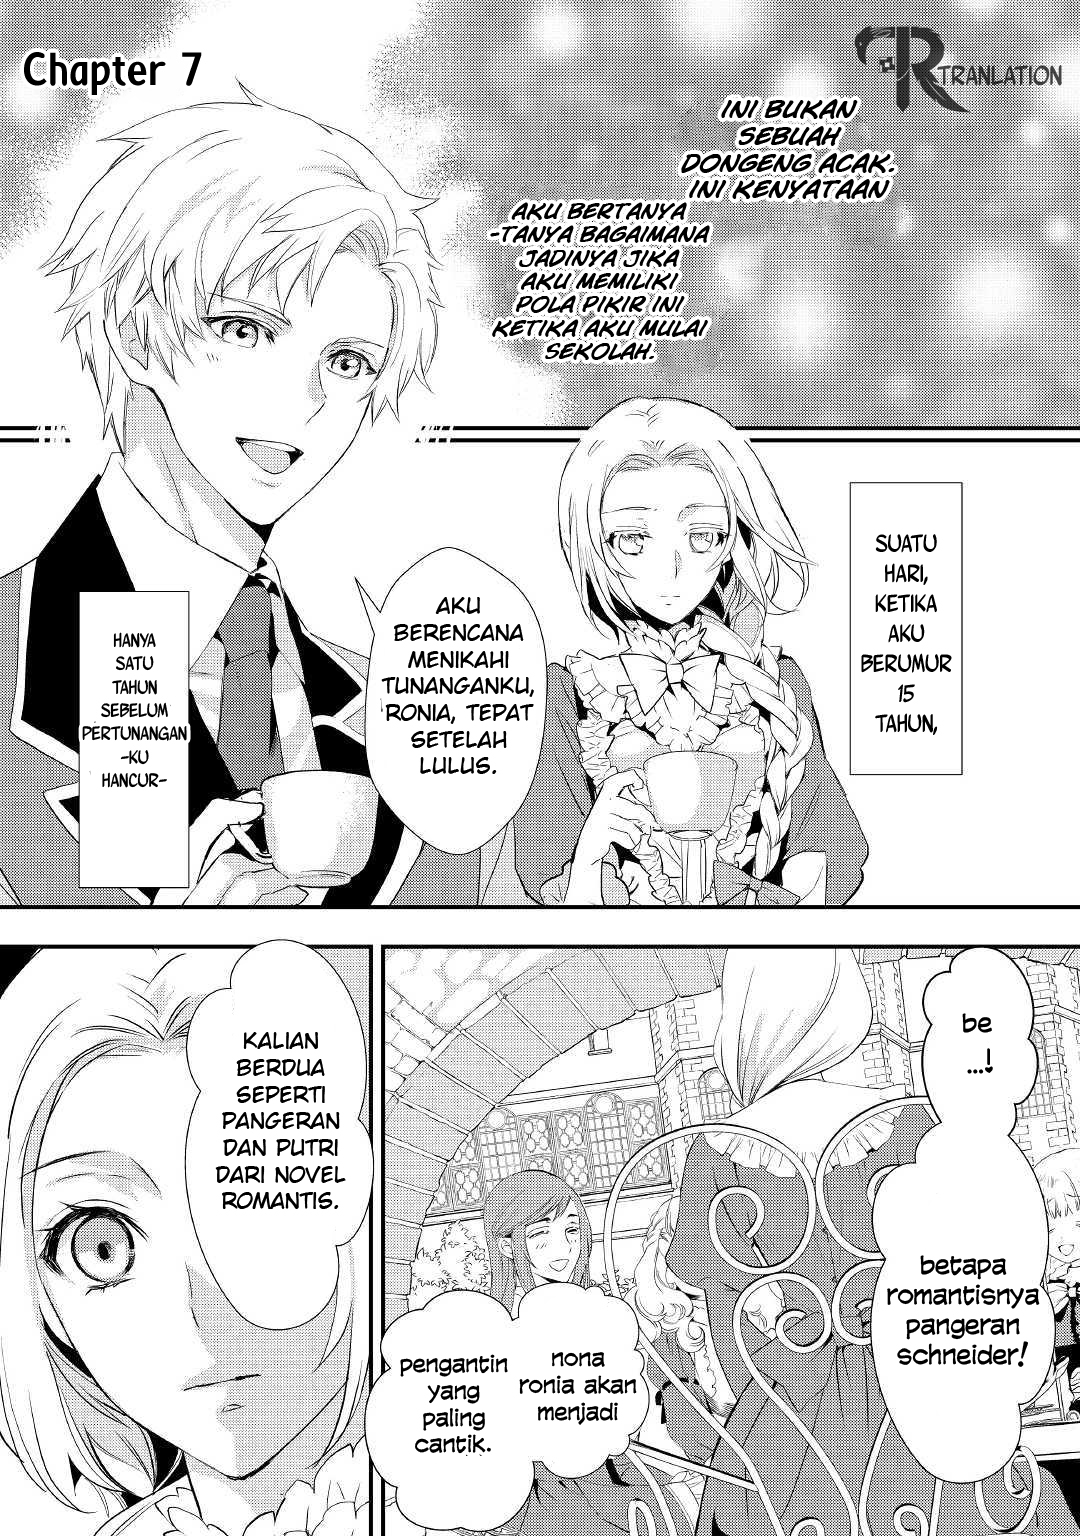 Milady Just Wants to Relax Chapter 07.1